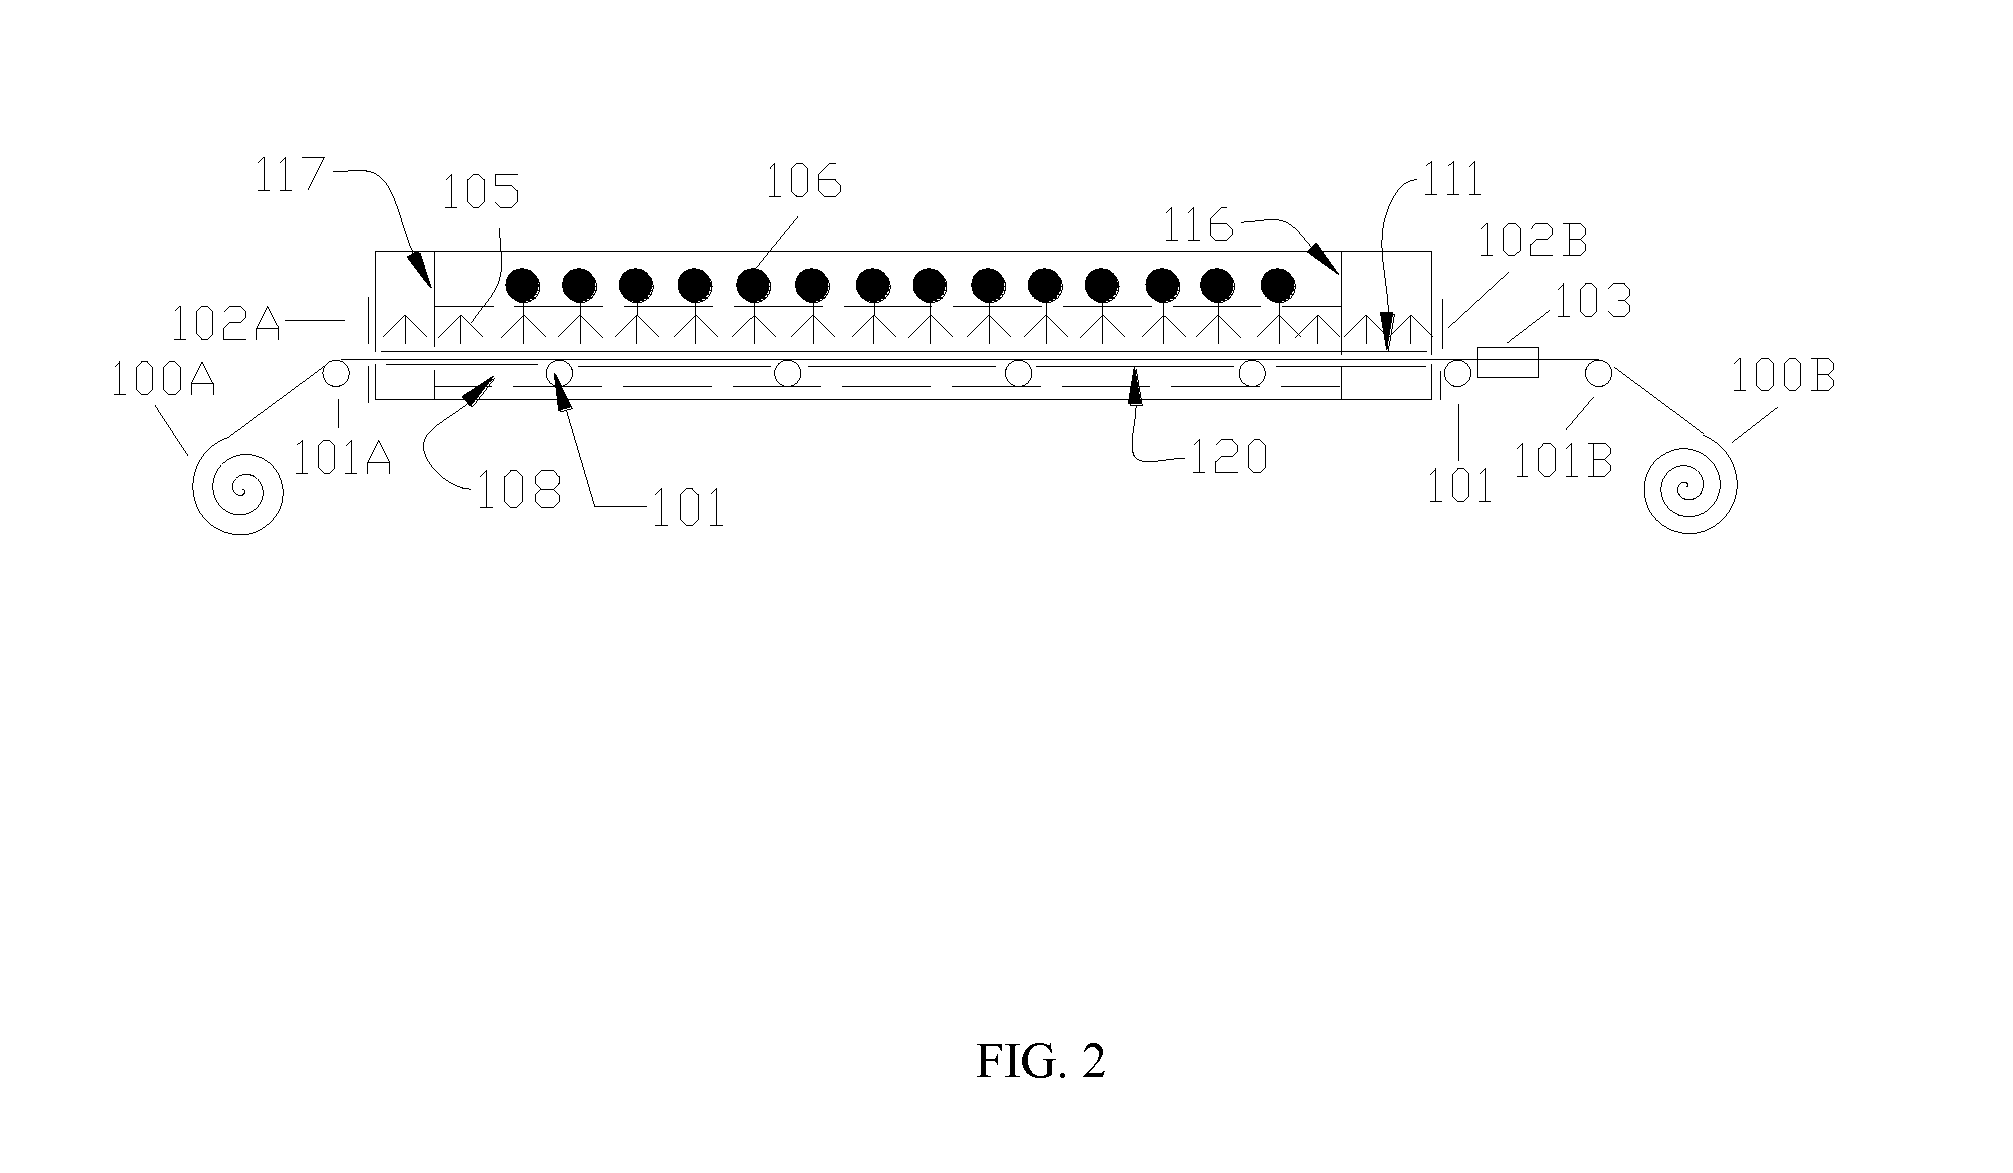 Chemical Bath Deposition Apparatus for Fabrication of Semiconductor Films through Roll-to-Roll Processes